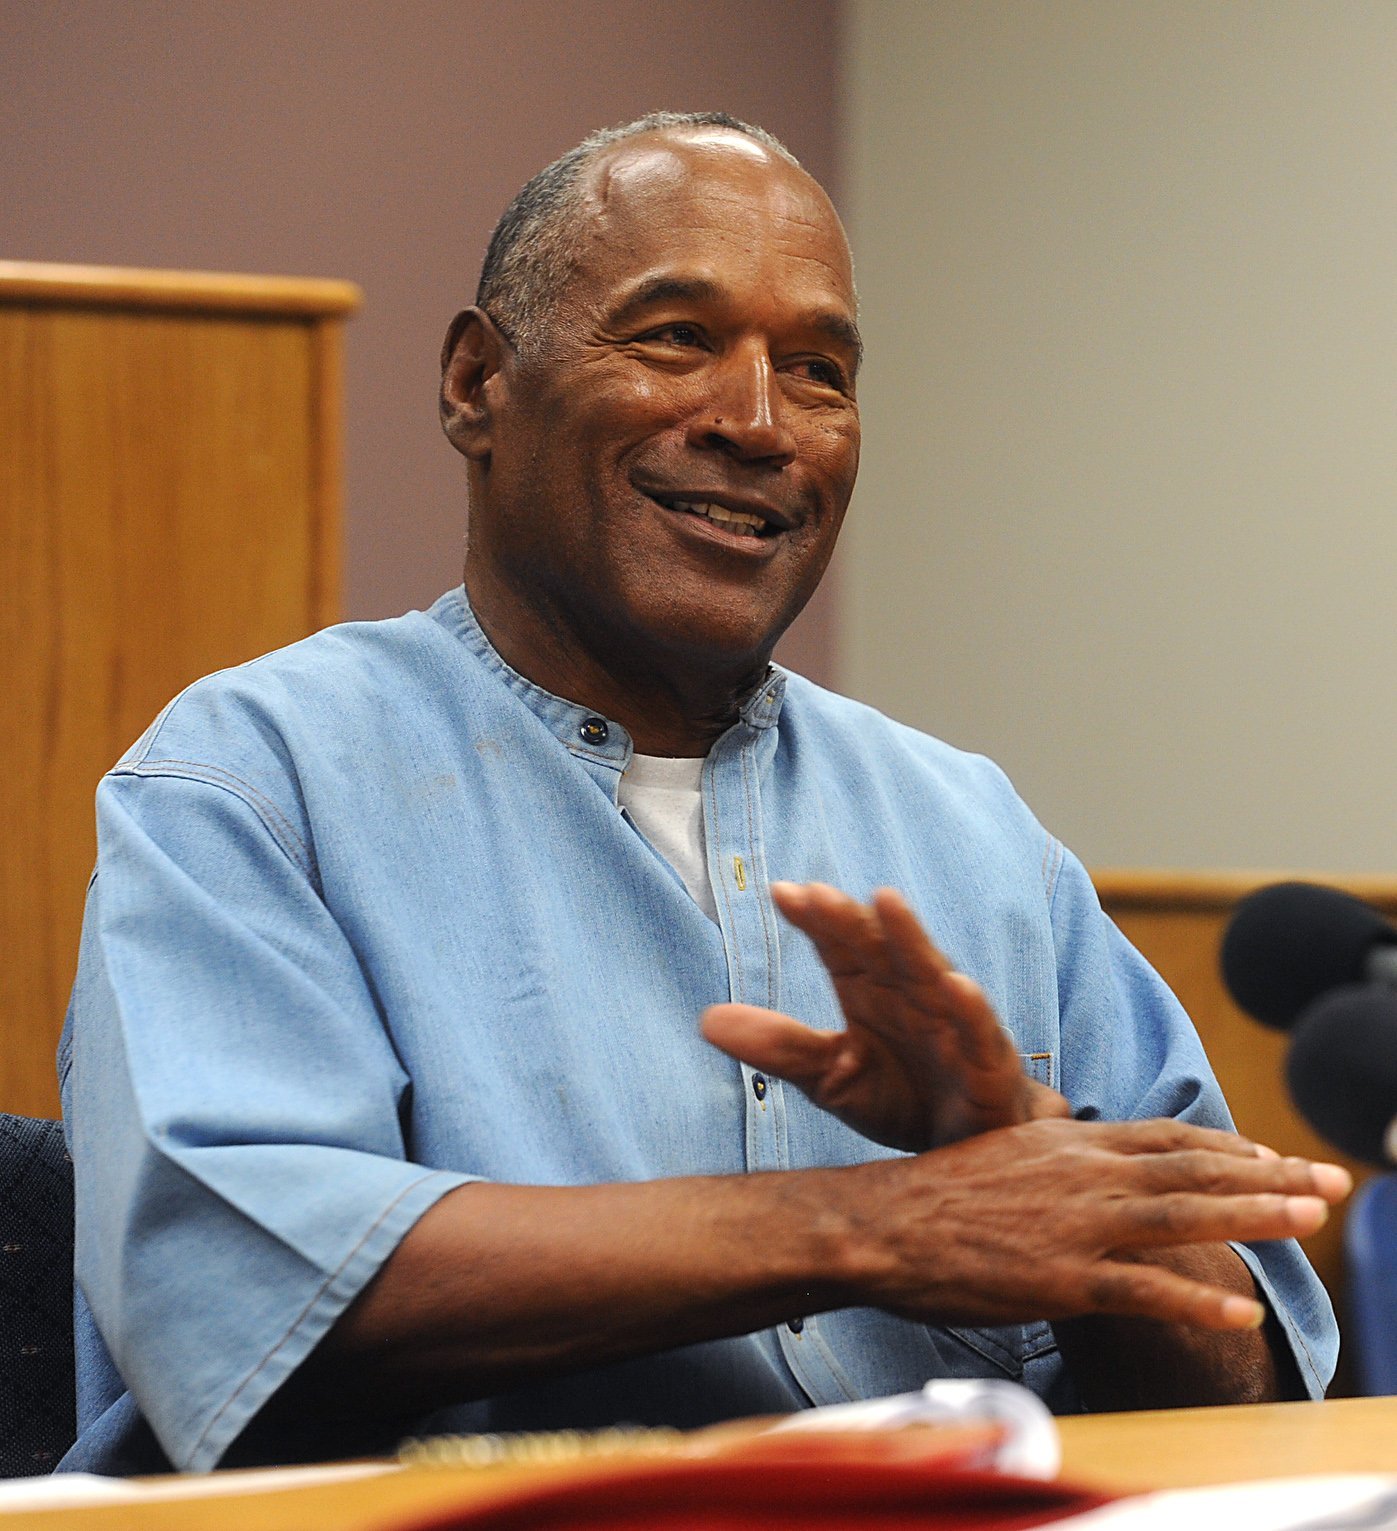 O.J. Simpson after a parole hearing at Lovelock Correctional Center in Lovelock, Nevada, U.S. on July 20, 2017. | Photo: Getty Images